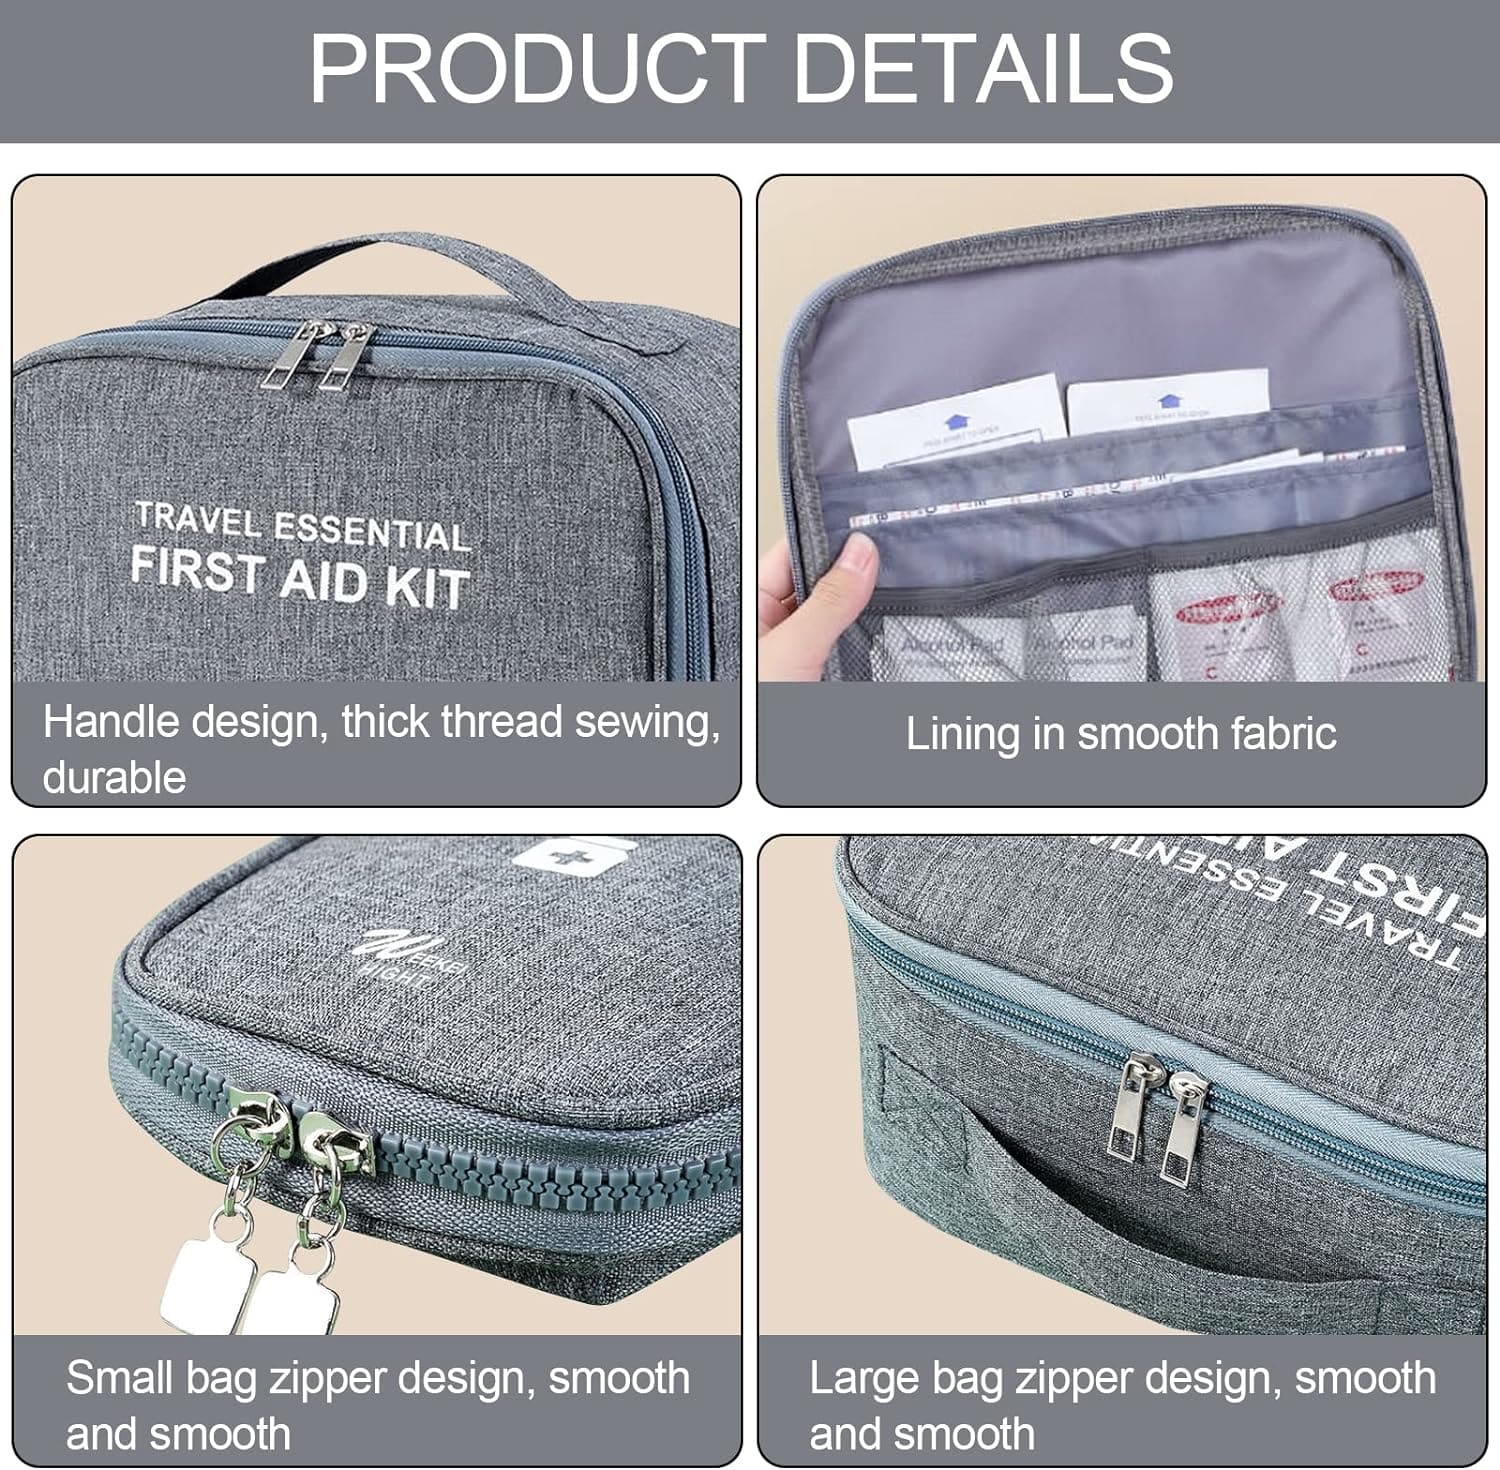 Travel Pharmacy Bag, First Aid Kit Pouch, Medicine Storage Bag for Home, Office, Outdoor, Waterproof Survival Emergency Bag, Travel Rescue Pouch, First Responder Medical Bag, Medical Supplies Organizer Bag, Multifunctional Large Capacity Bag